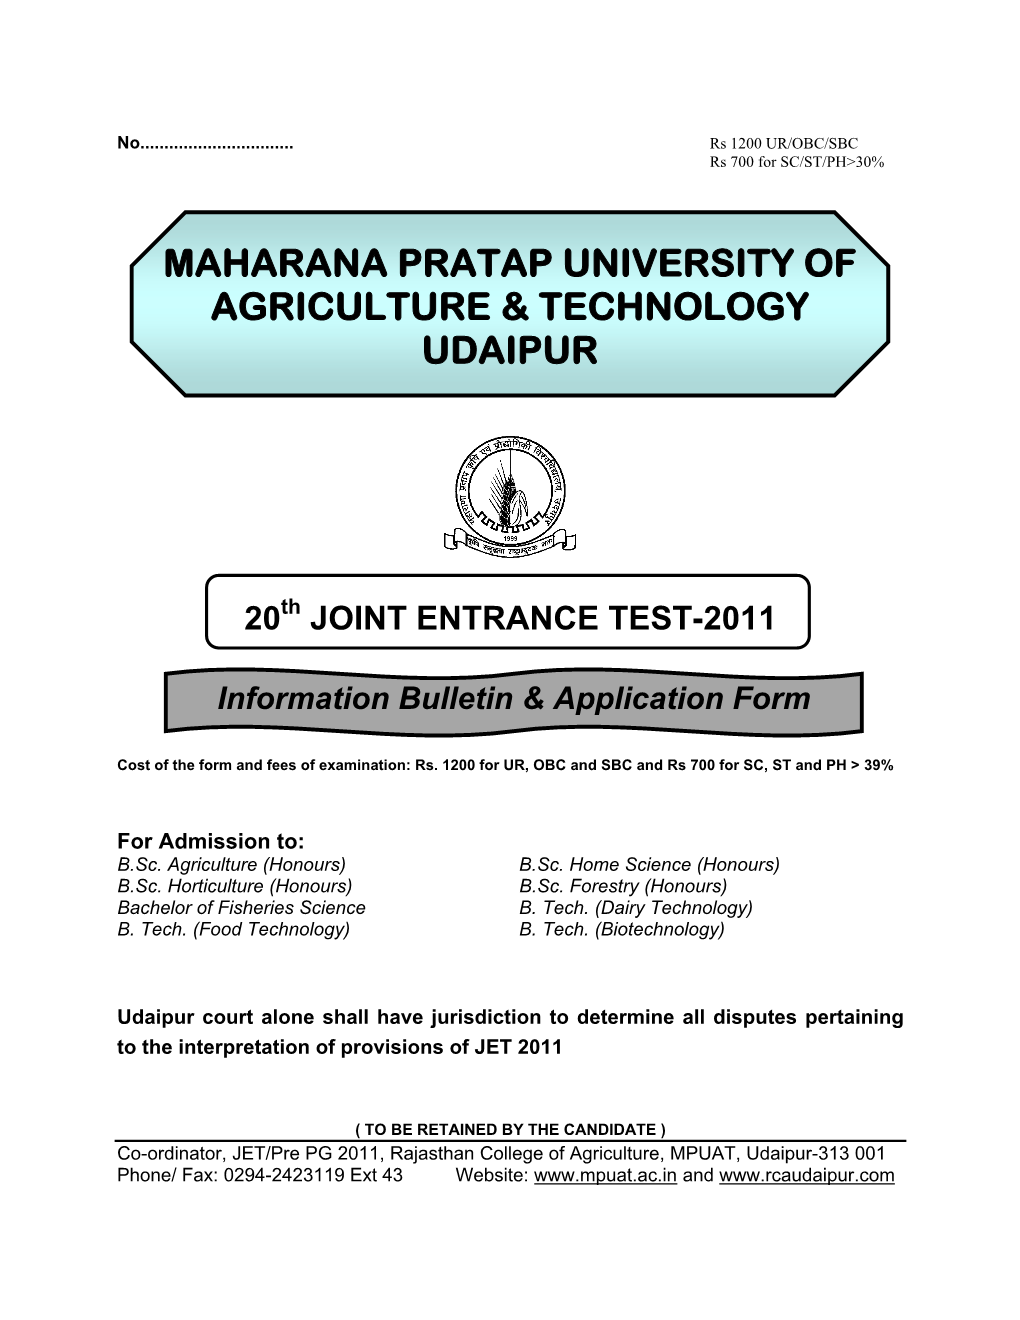 Maharana Pratap University of Agriculture & Technology, Udaipur, Notified from Time to Time